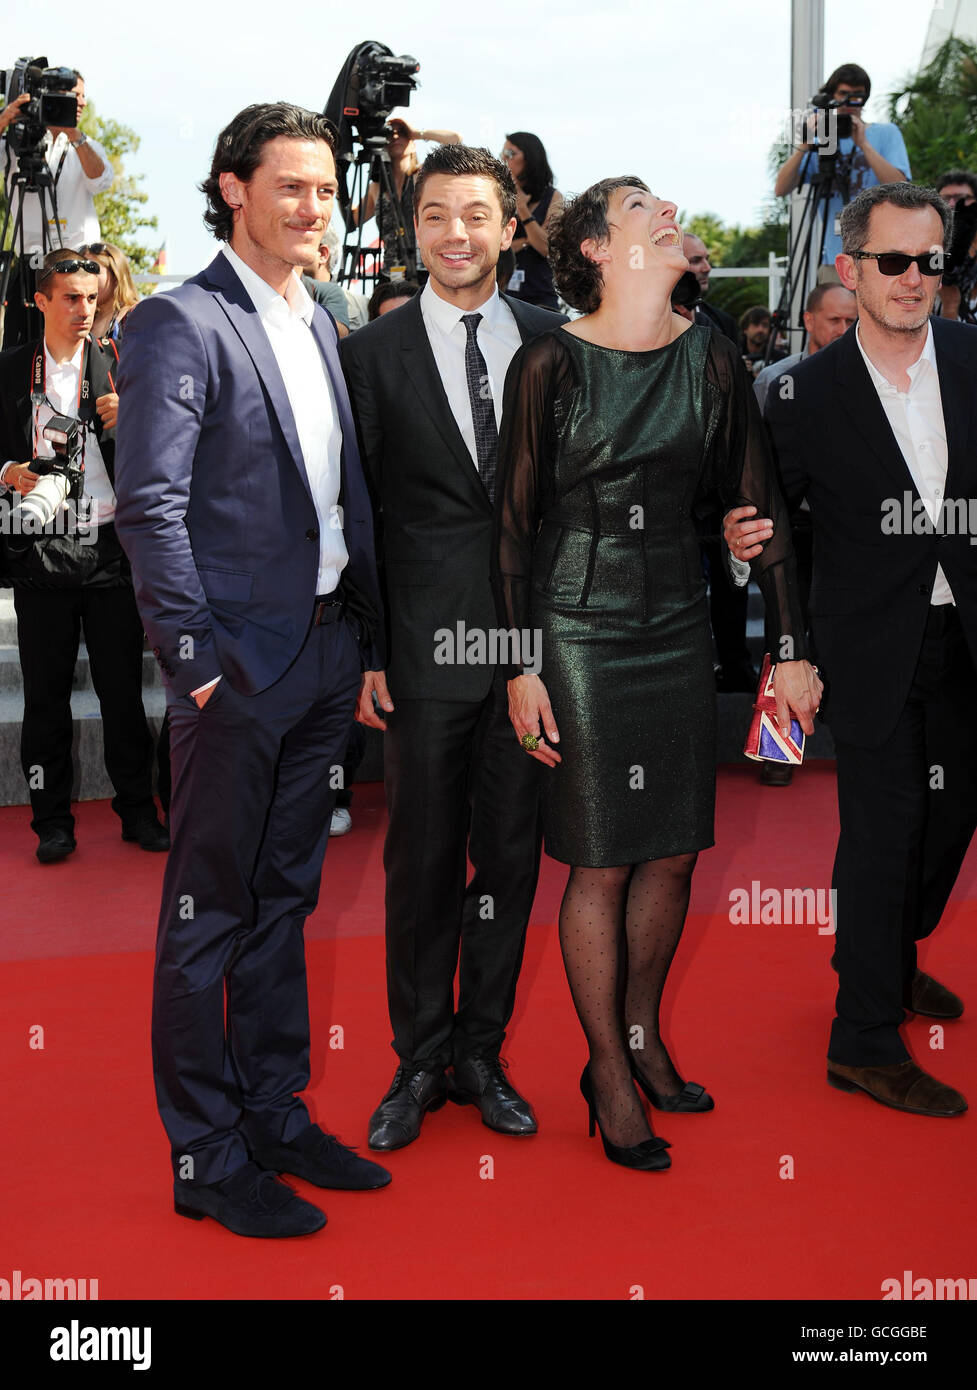 (Left - 2nd right) Actors Luke Evans, Dominic Cooper and Tamsin Greig arrive for the premiere of new Stephen Frears' film, Tamara Drewe, in which they star, during the 63rd Cannes Film Festival, France. Stock Photo